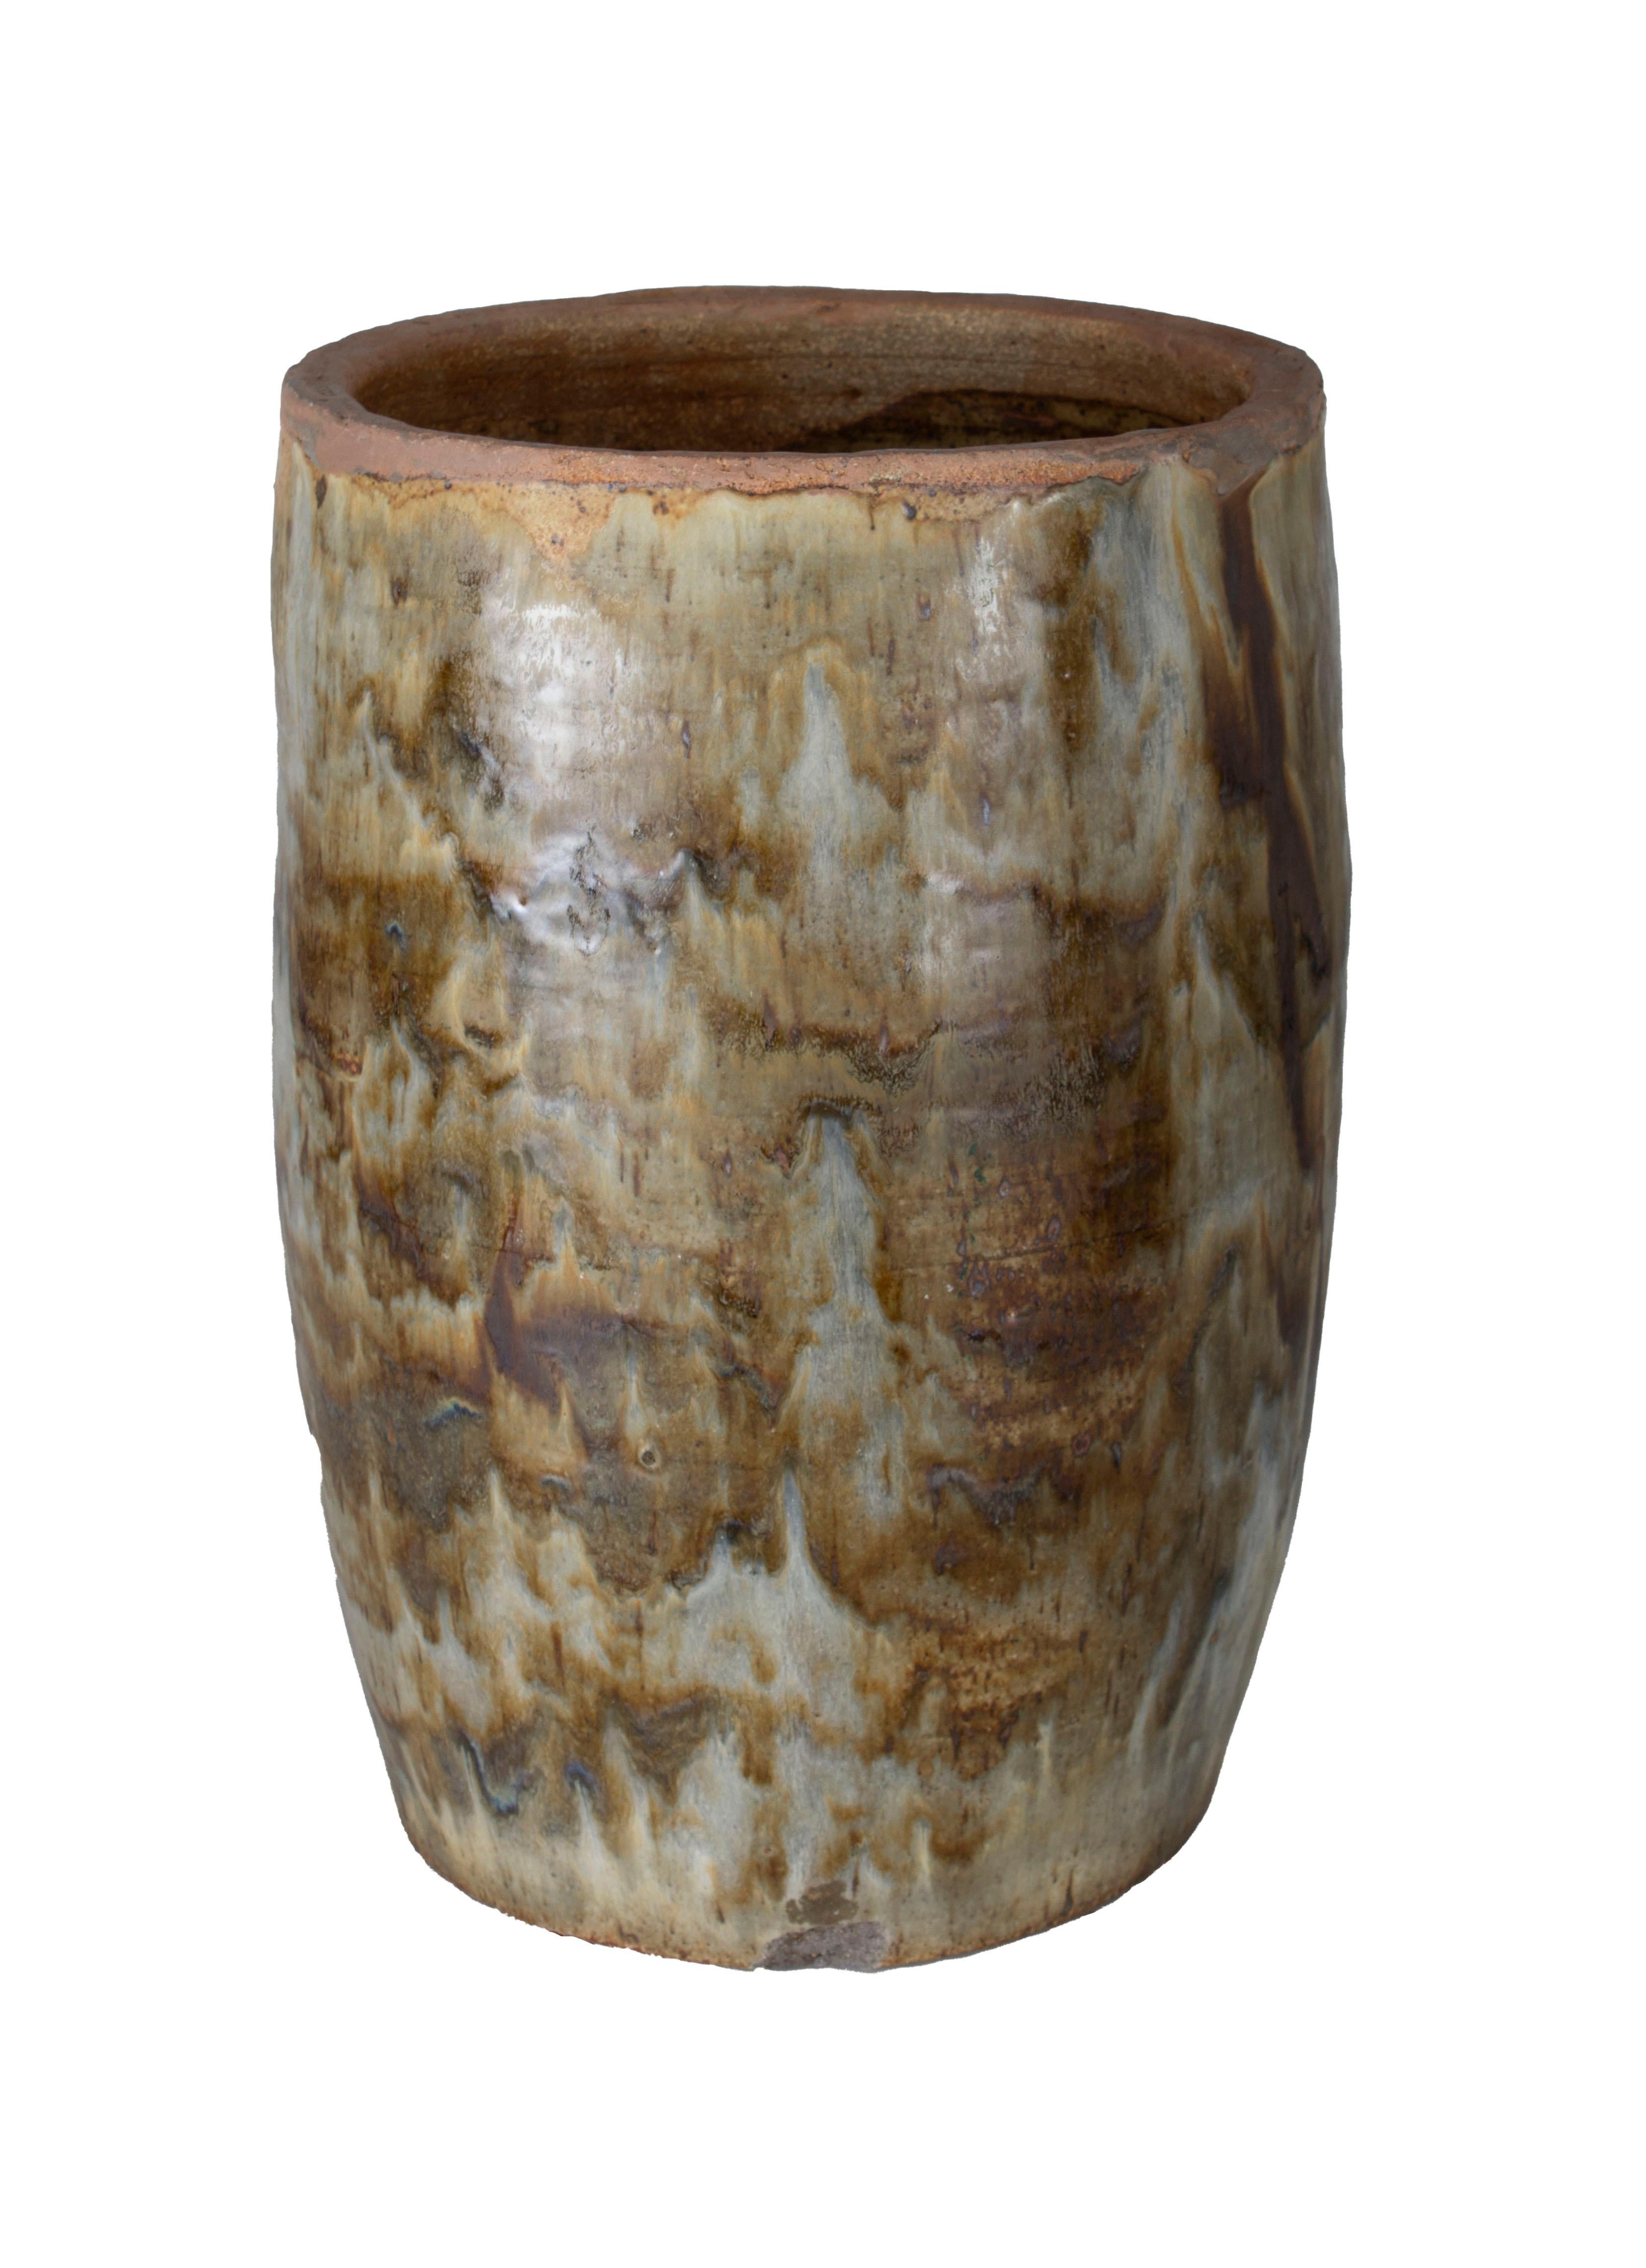 Eric O'Leary Tariki Studio pottery monumental glazed pot

Sourced by our local accessories team.